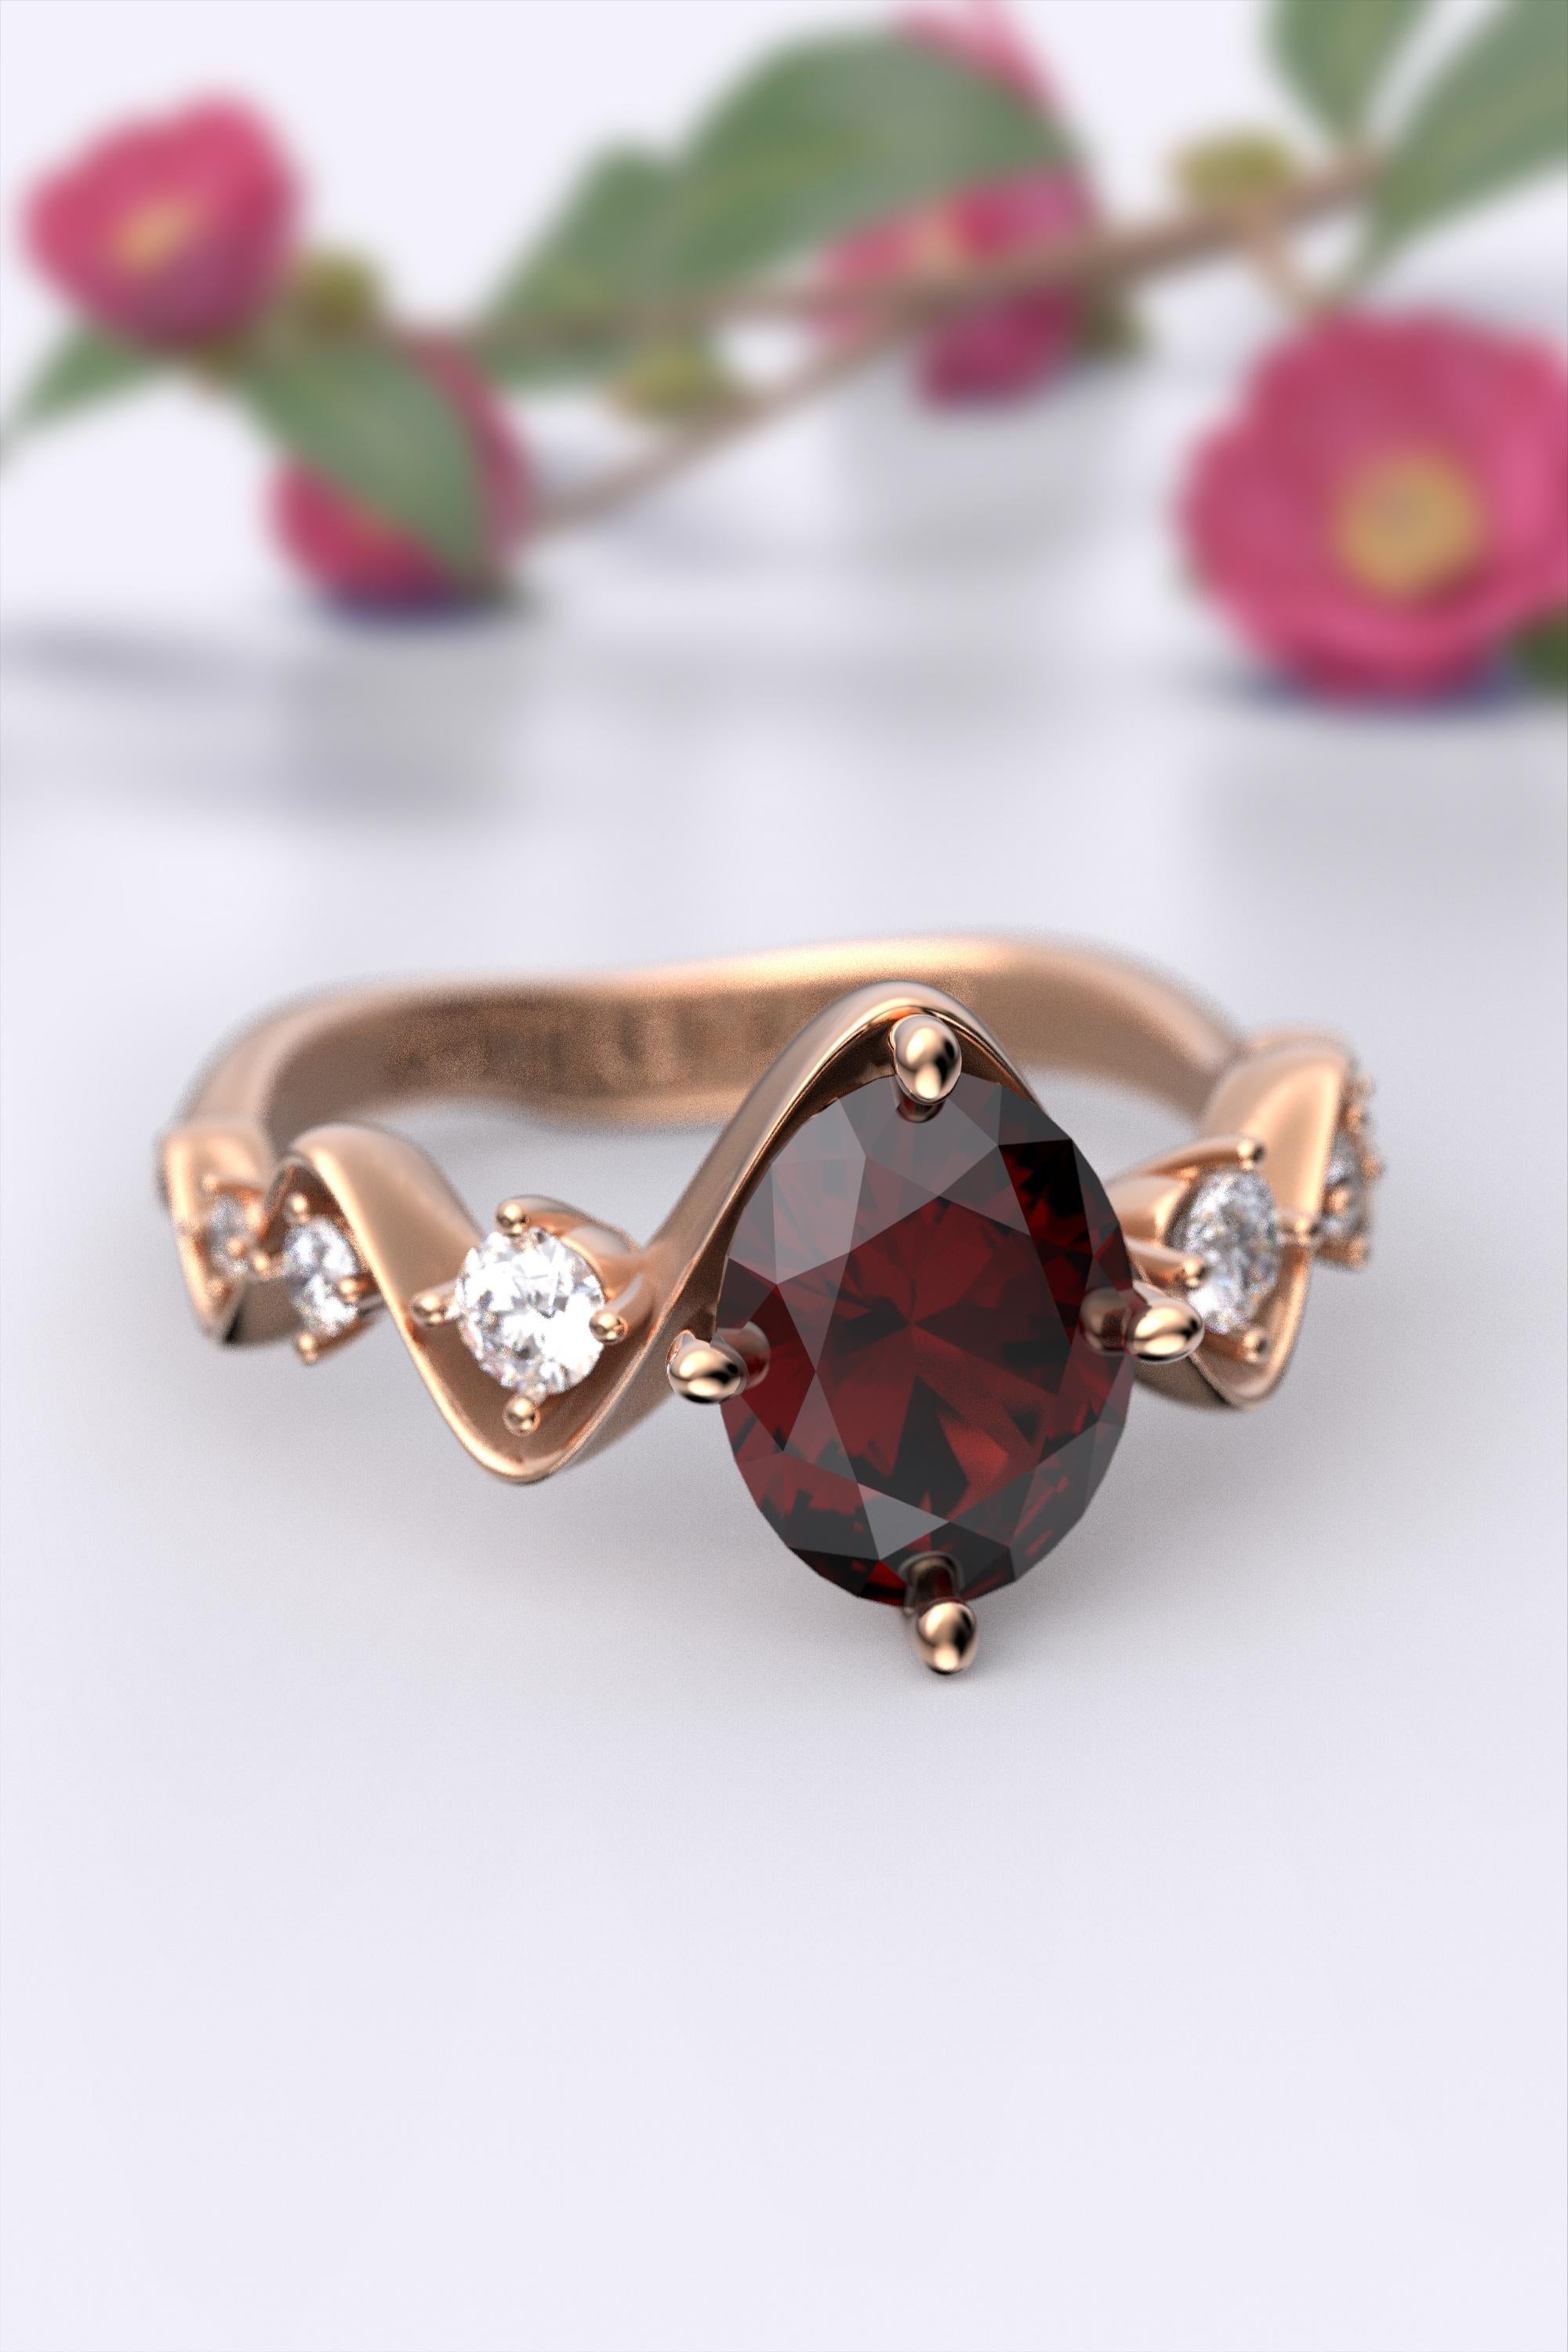 For Sale:  Natural Garnet and Diamonds Italian 14k Gold Engagement Ring, Oltremare Gioielli 6